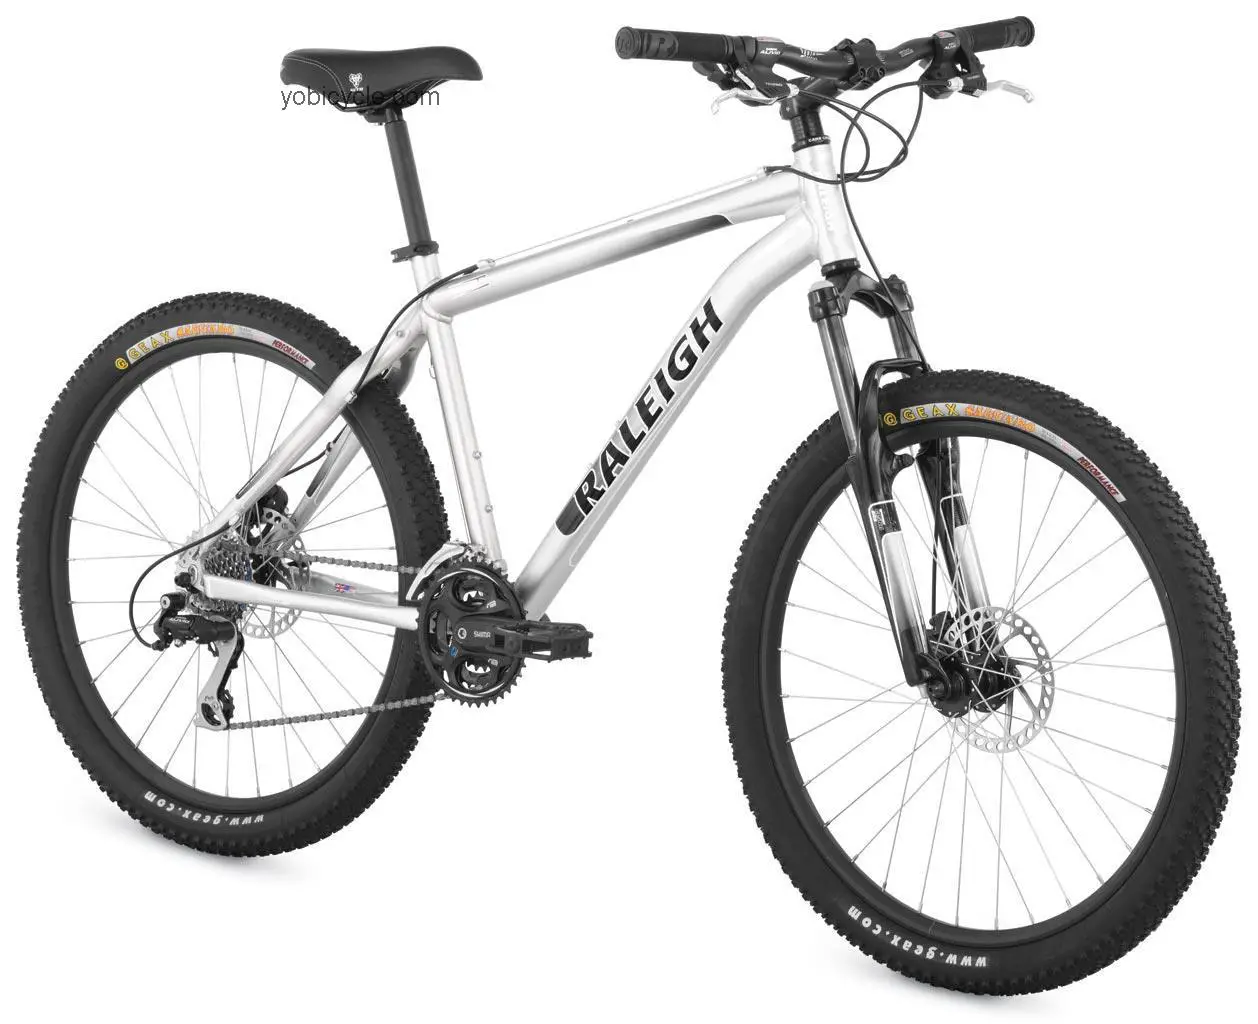 Raleigh Mojave 5.0 2009 comparison online with competitors